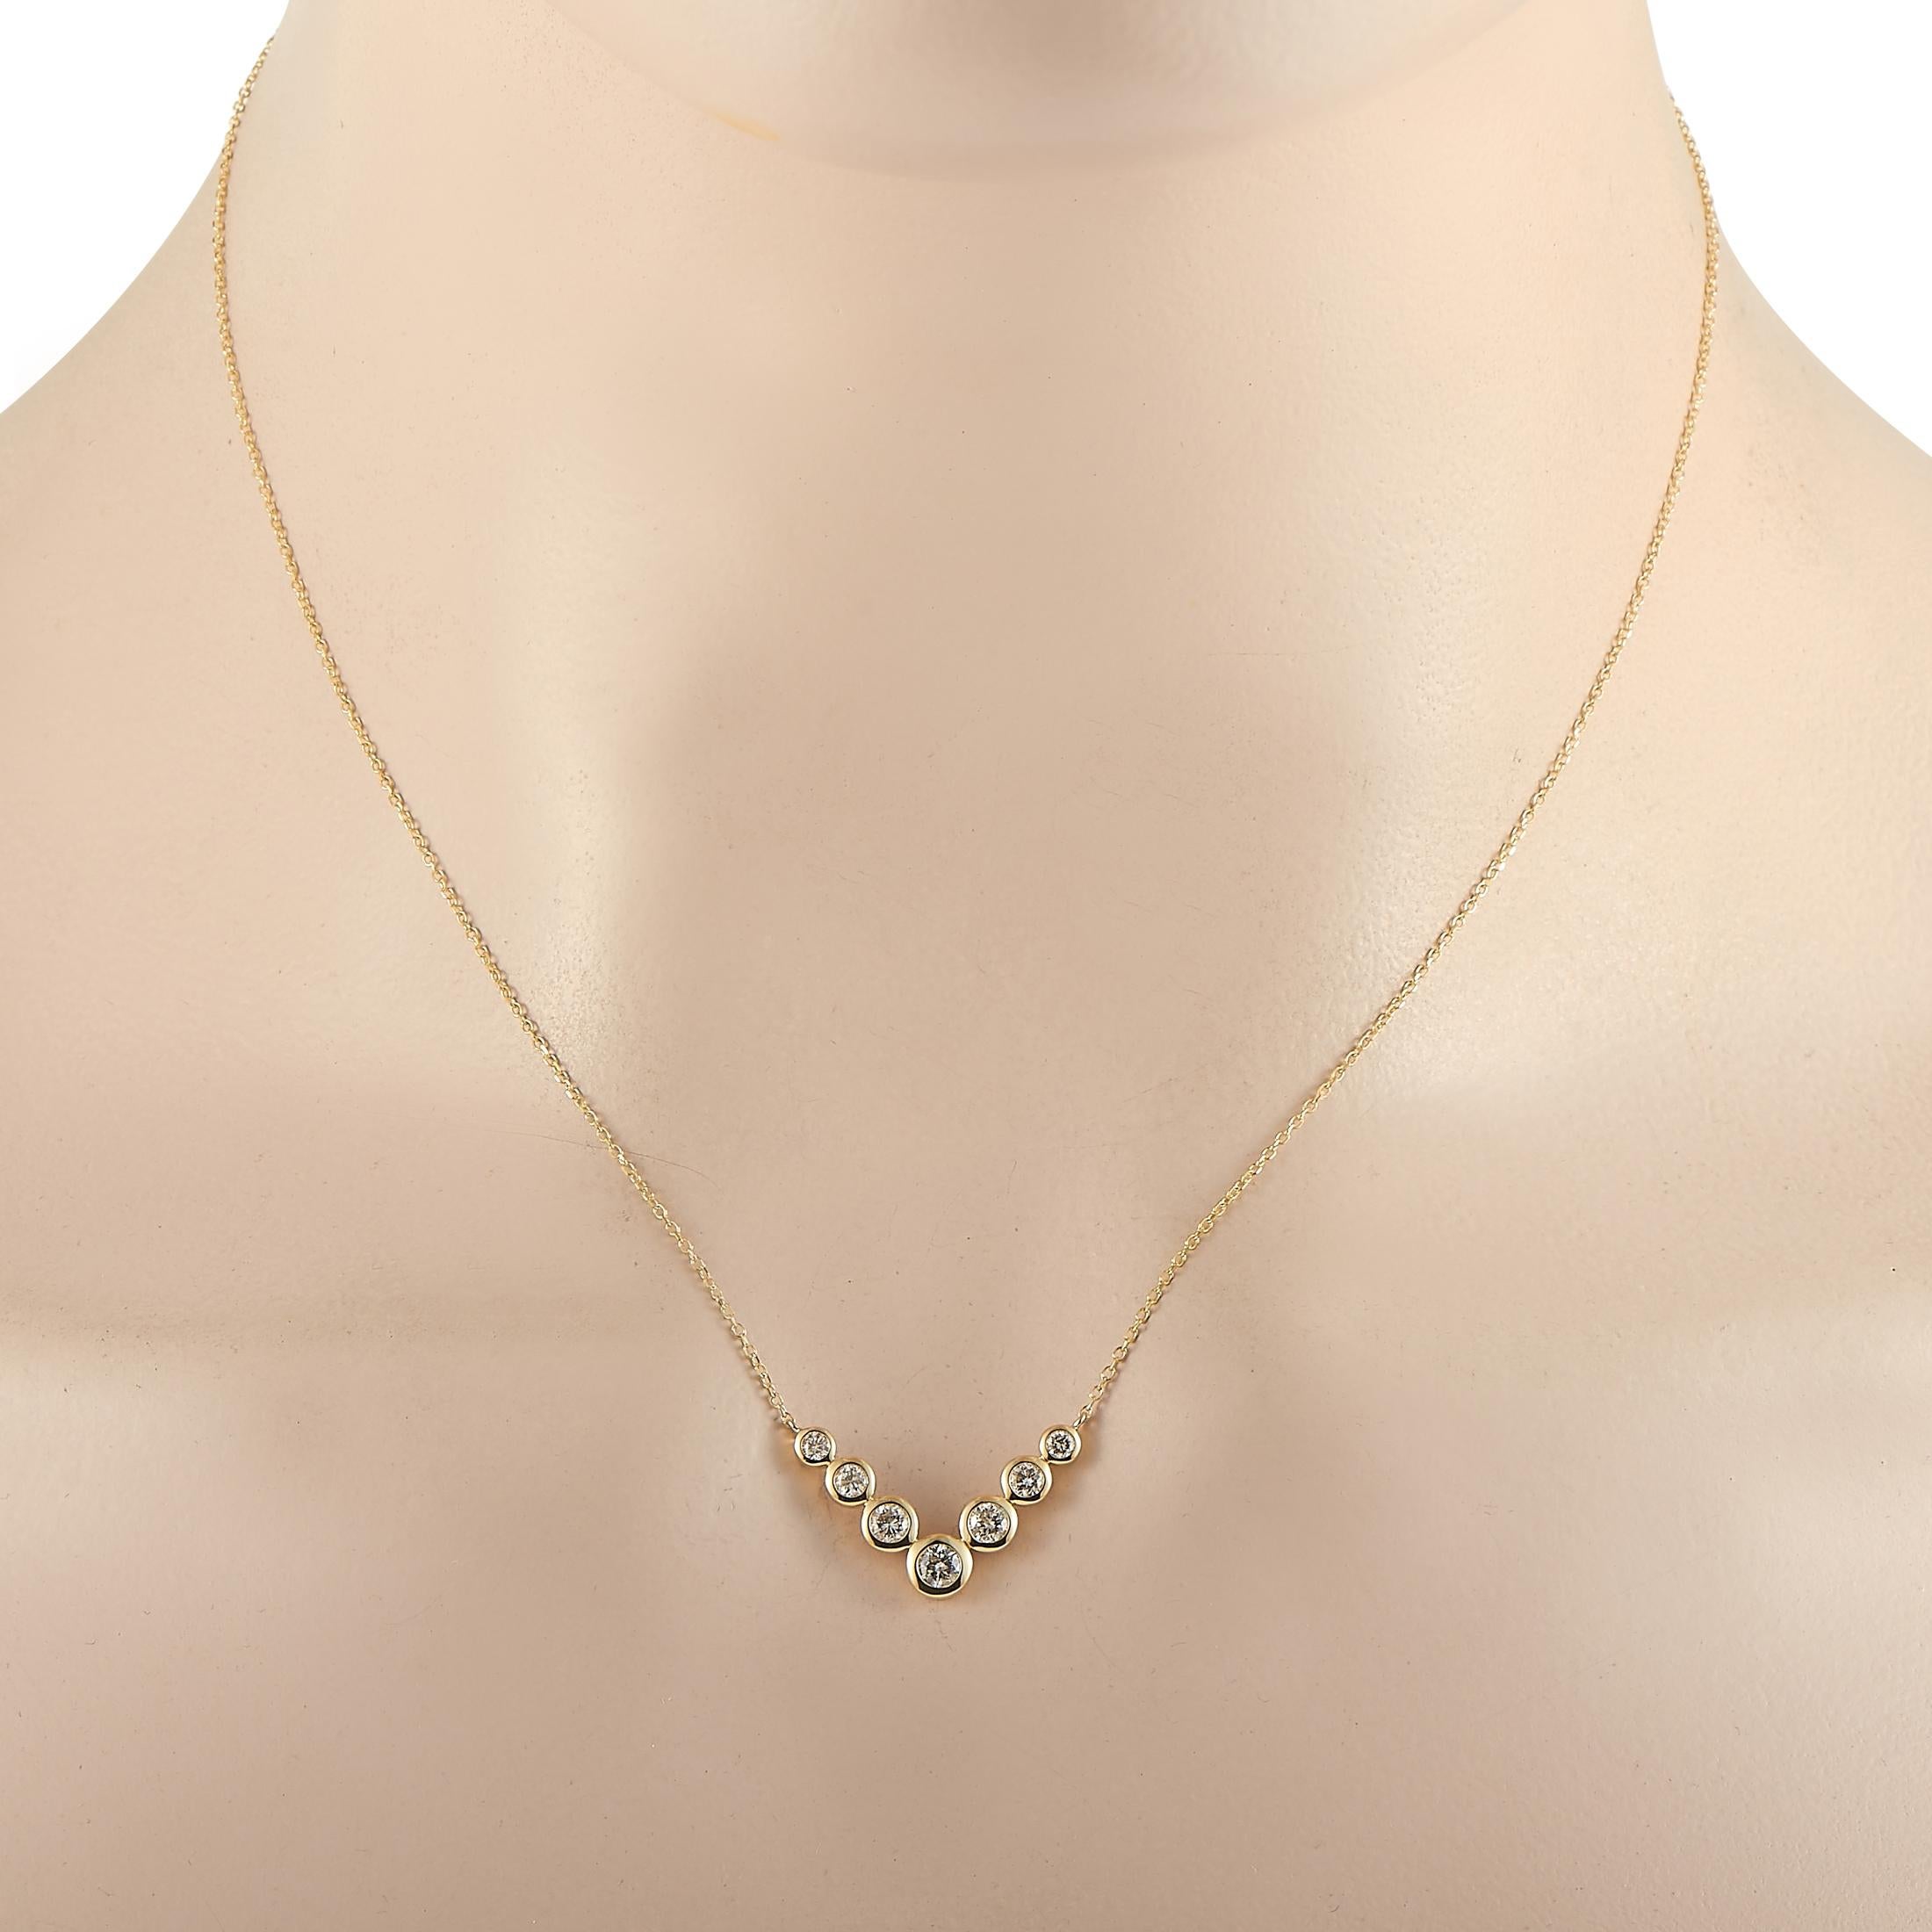 This LB Exclusive necklace is made of 14K yellow gold and embellished with diamonds that amount to 0.50 carats. The necklace weighs 2.4 grams and boasts a 16” chain and a pendant that measures 0.55” in length and 1” in width.
 
 Offered in brand